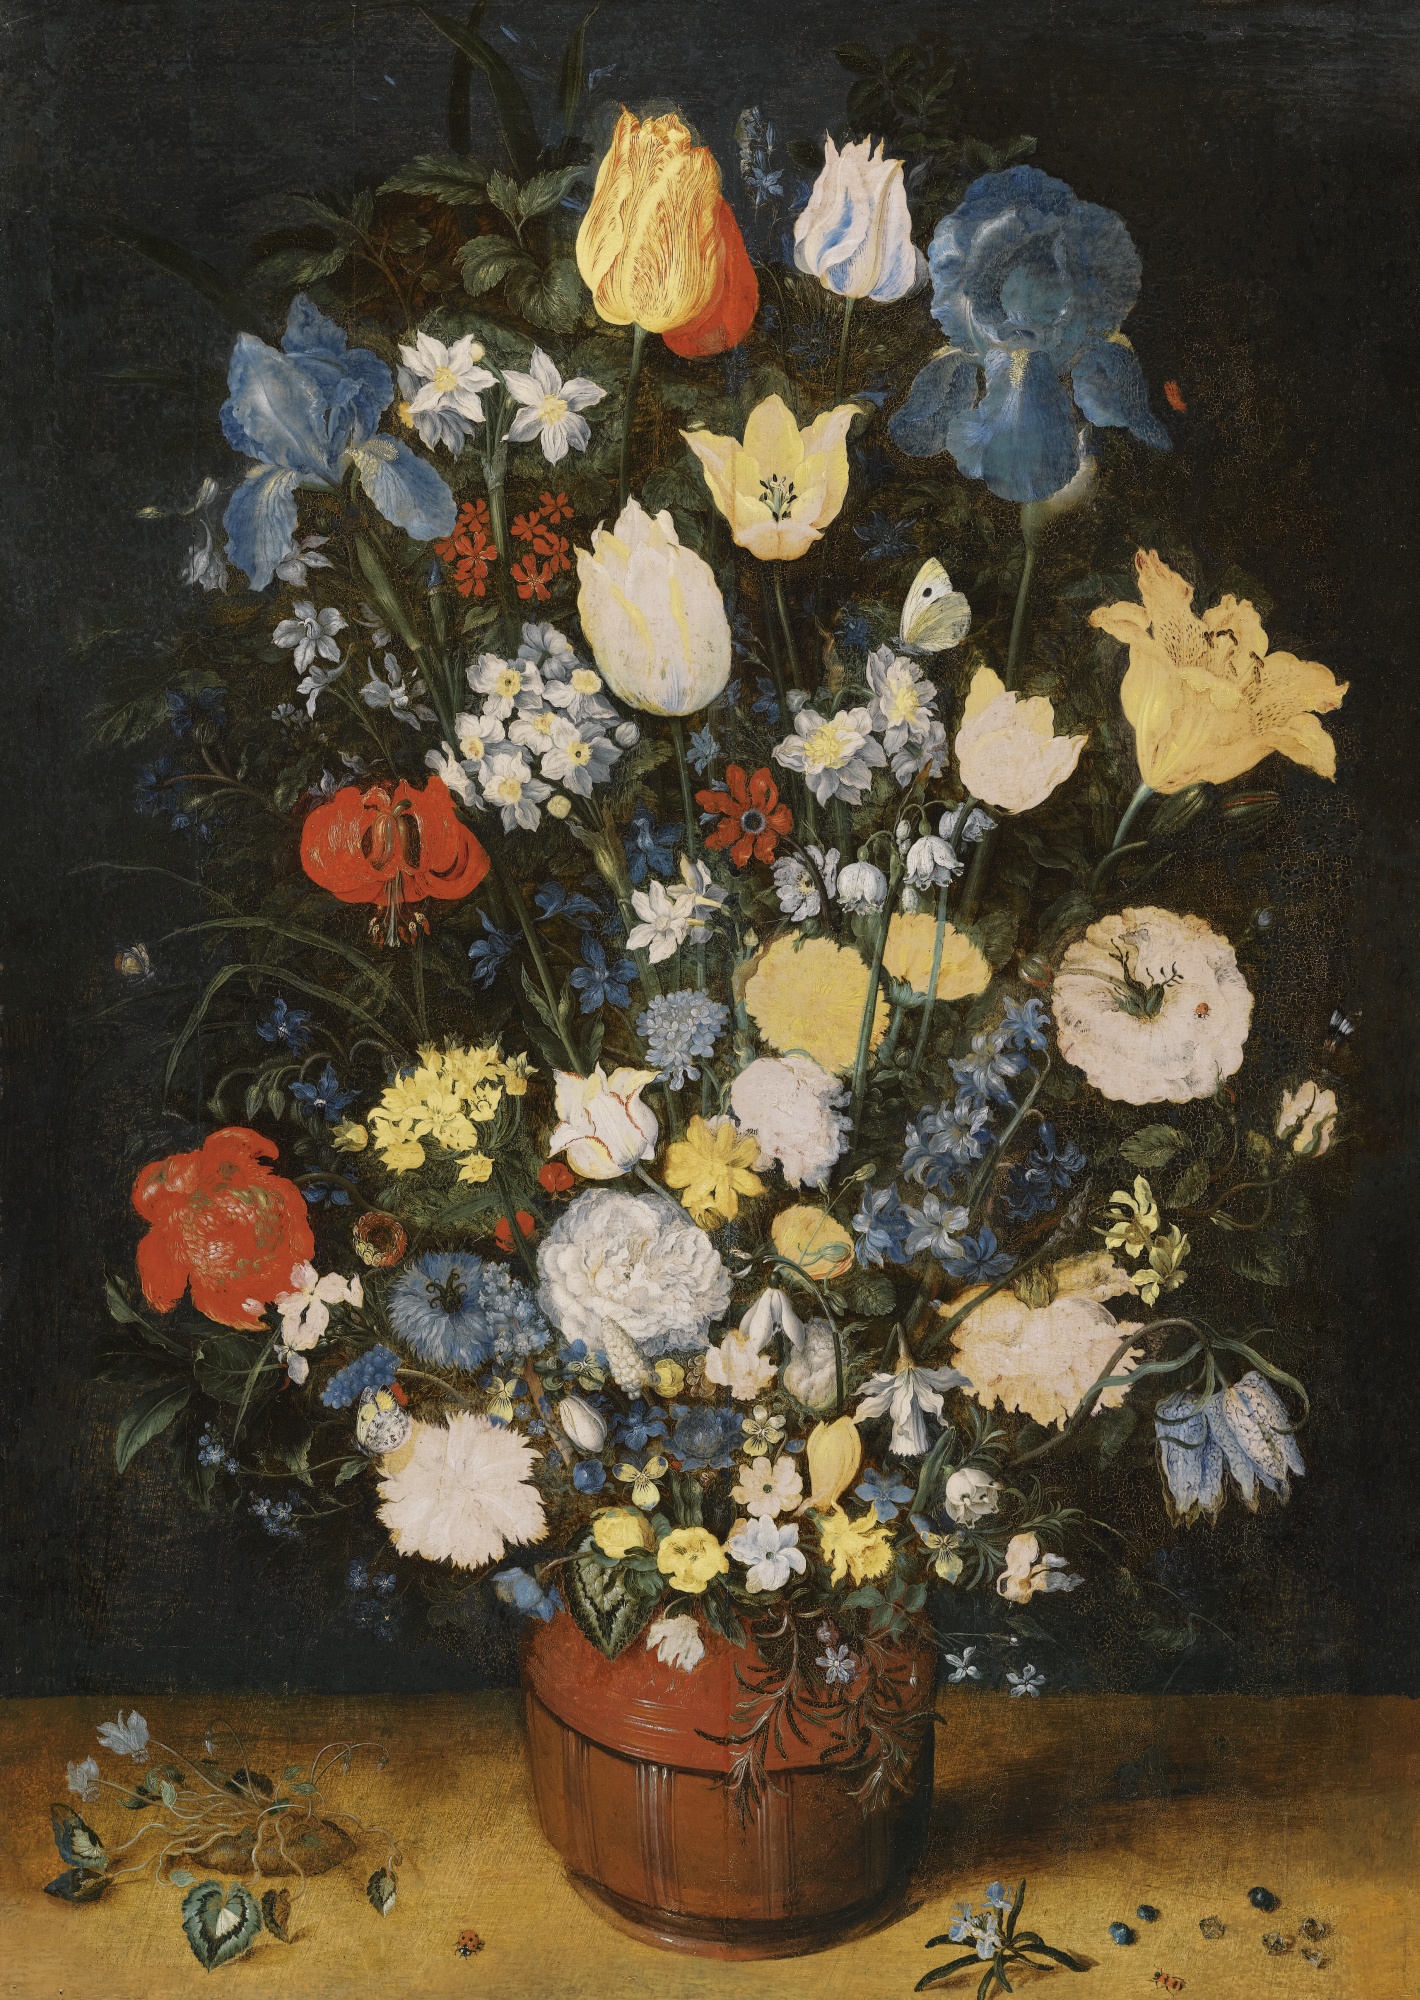 Still Life with Irises, Roses, Tulips, Narcissae, Cardamine, Cyclamen, Hyacinths, Calendula, Eranthis and Other Flowers in a Wide-Bottomed Vase on a Ledge